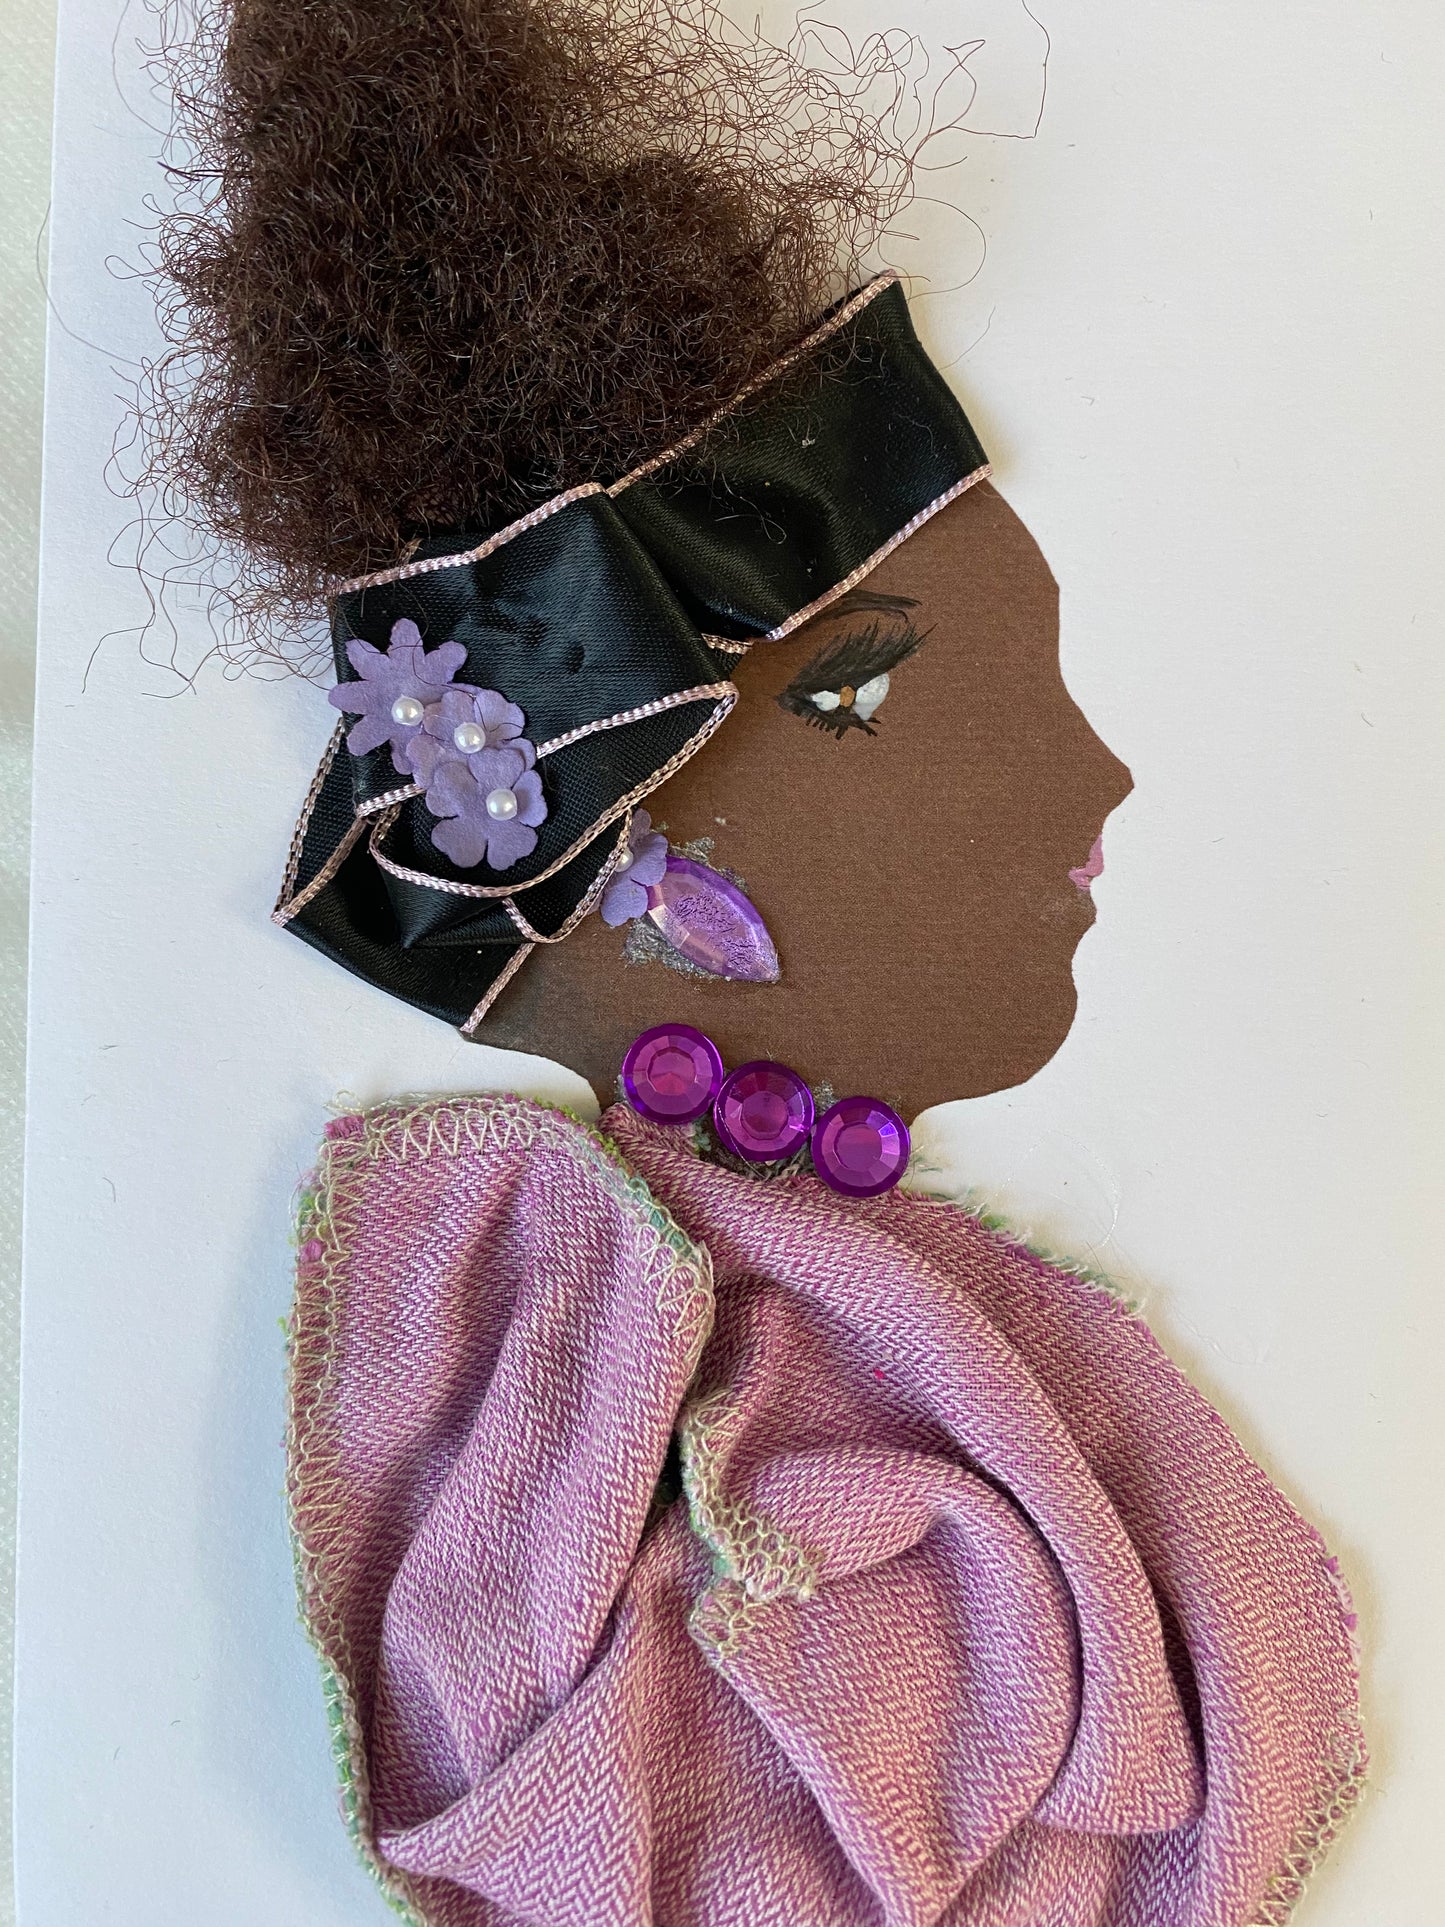 I designed this card of a woman who is wearing an elegant dark blue headband with three purple flowers. She wears an angelic purple blouse with ravishing purple jewellery. 